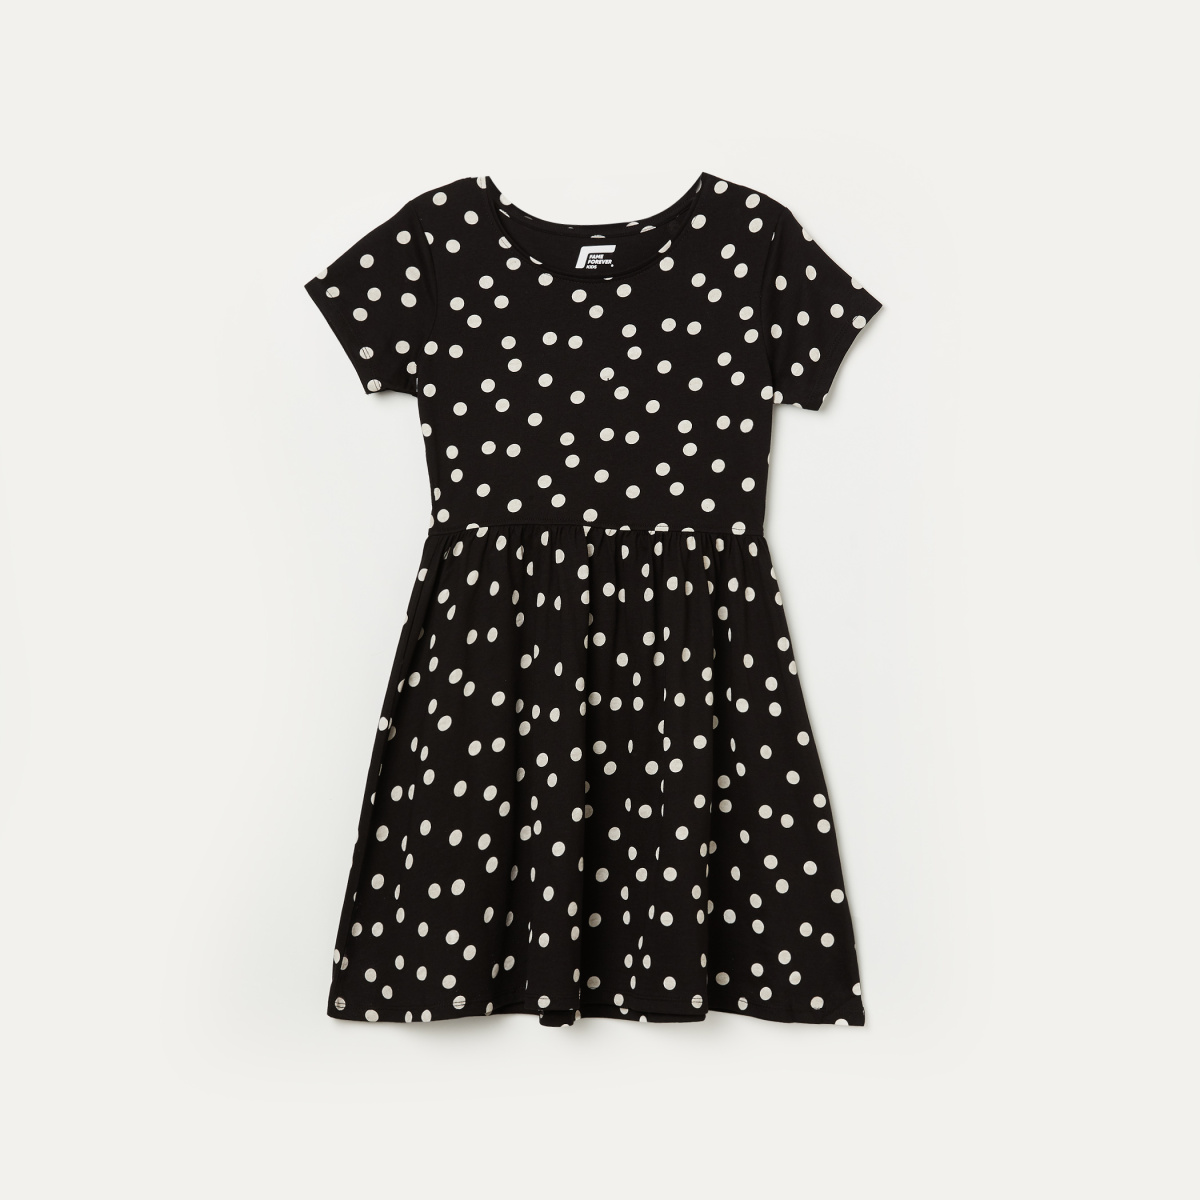 FAME FOREVER YOUNG Girls Polka Dot Printed A-Line Dress